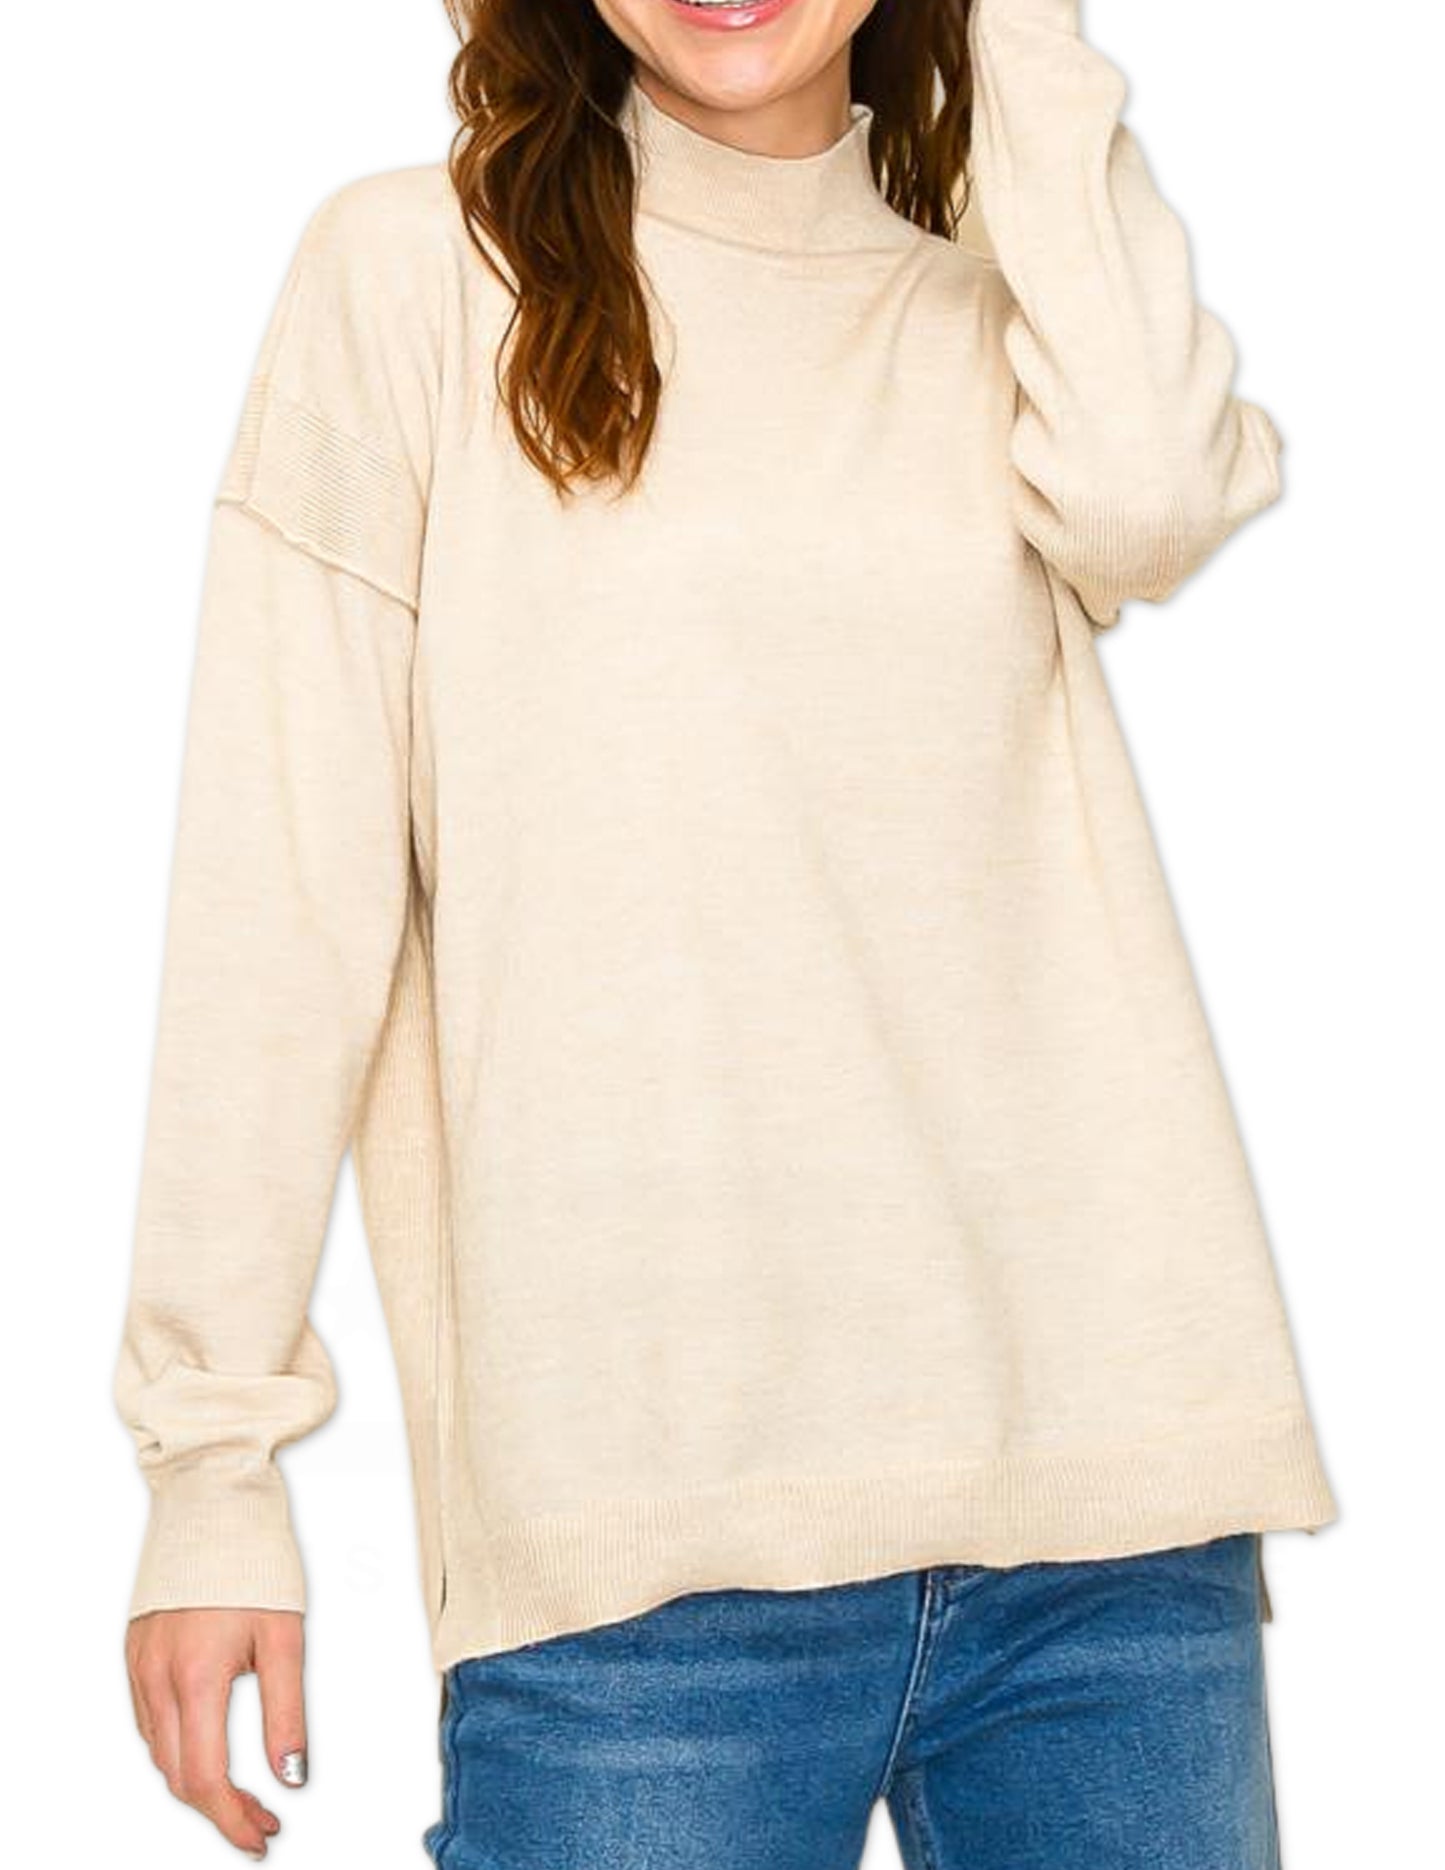 Out Seam Solid Sweater - Oatmeal